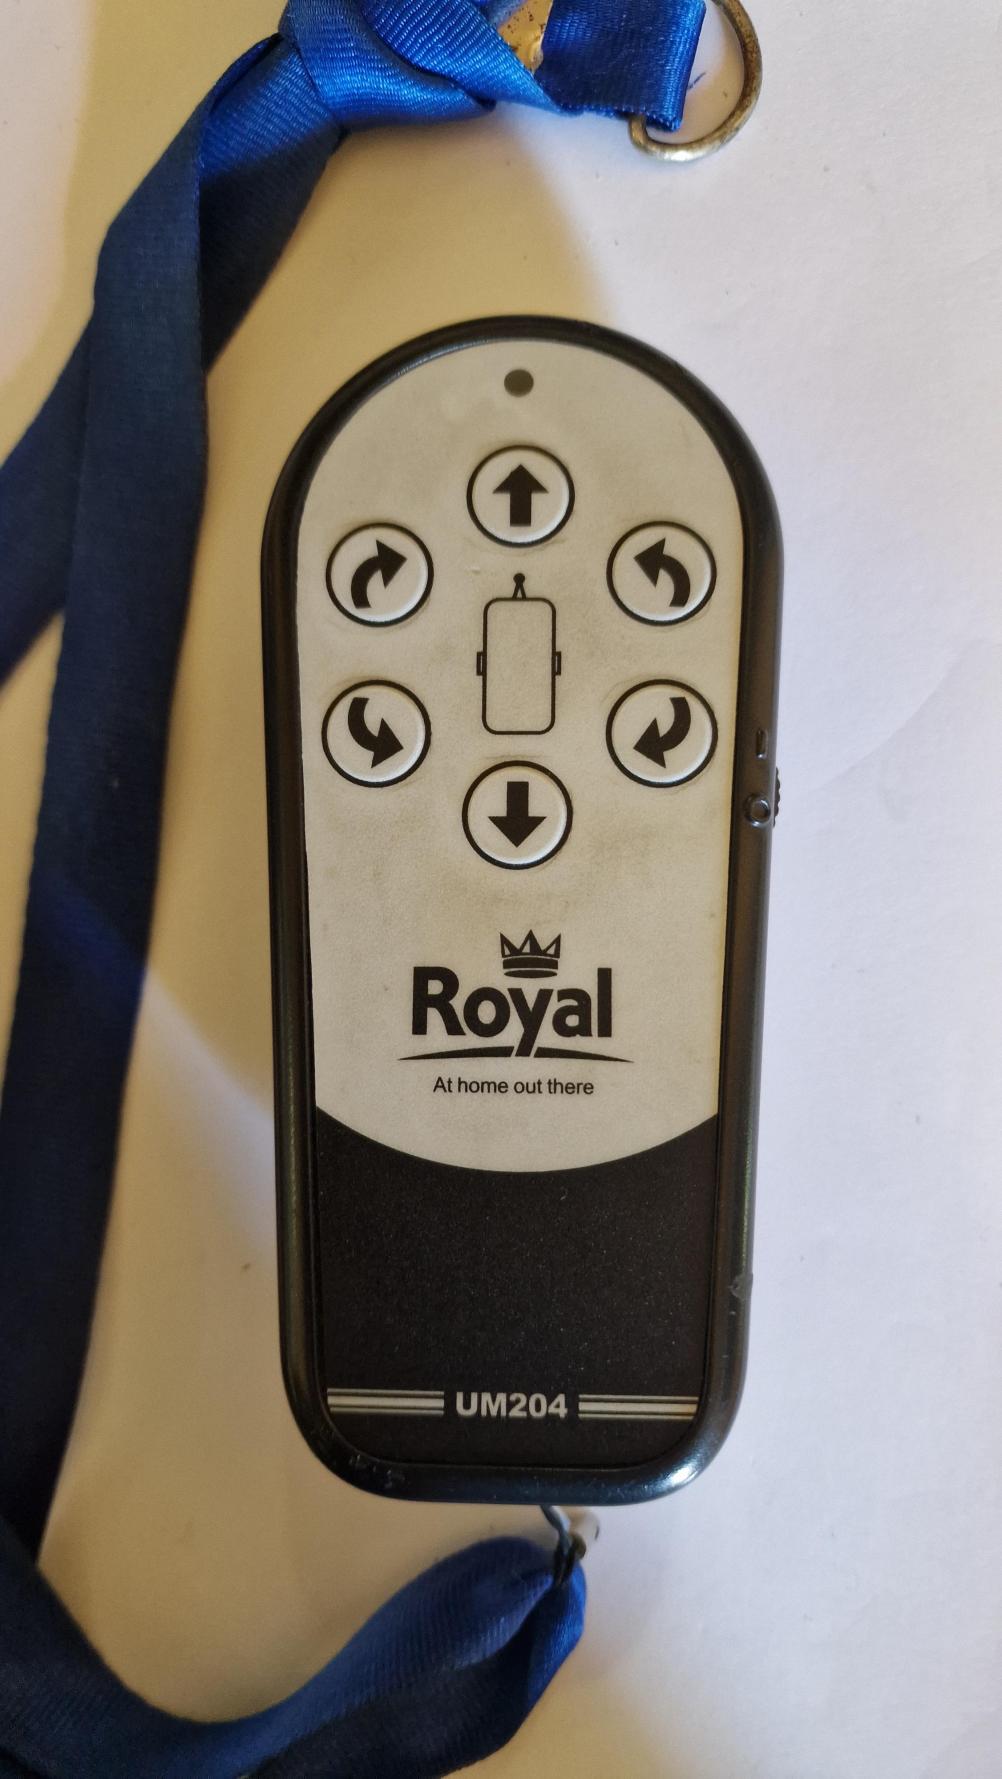 Royal  Remote Control - Front Image